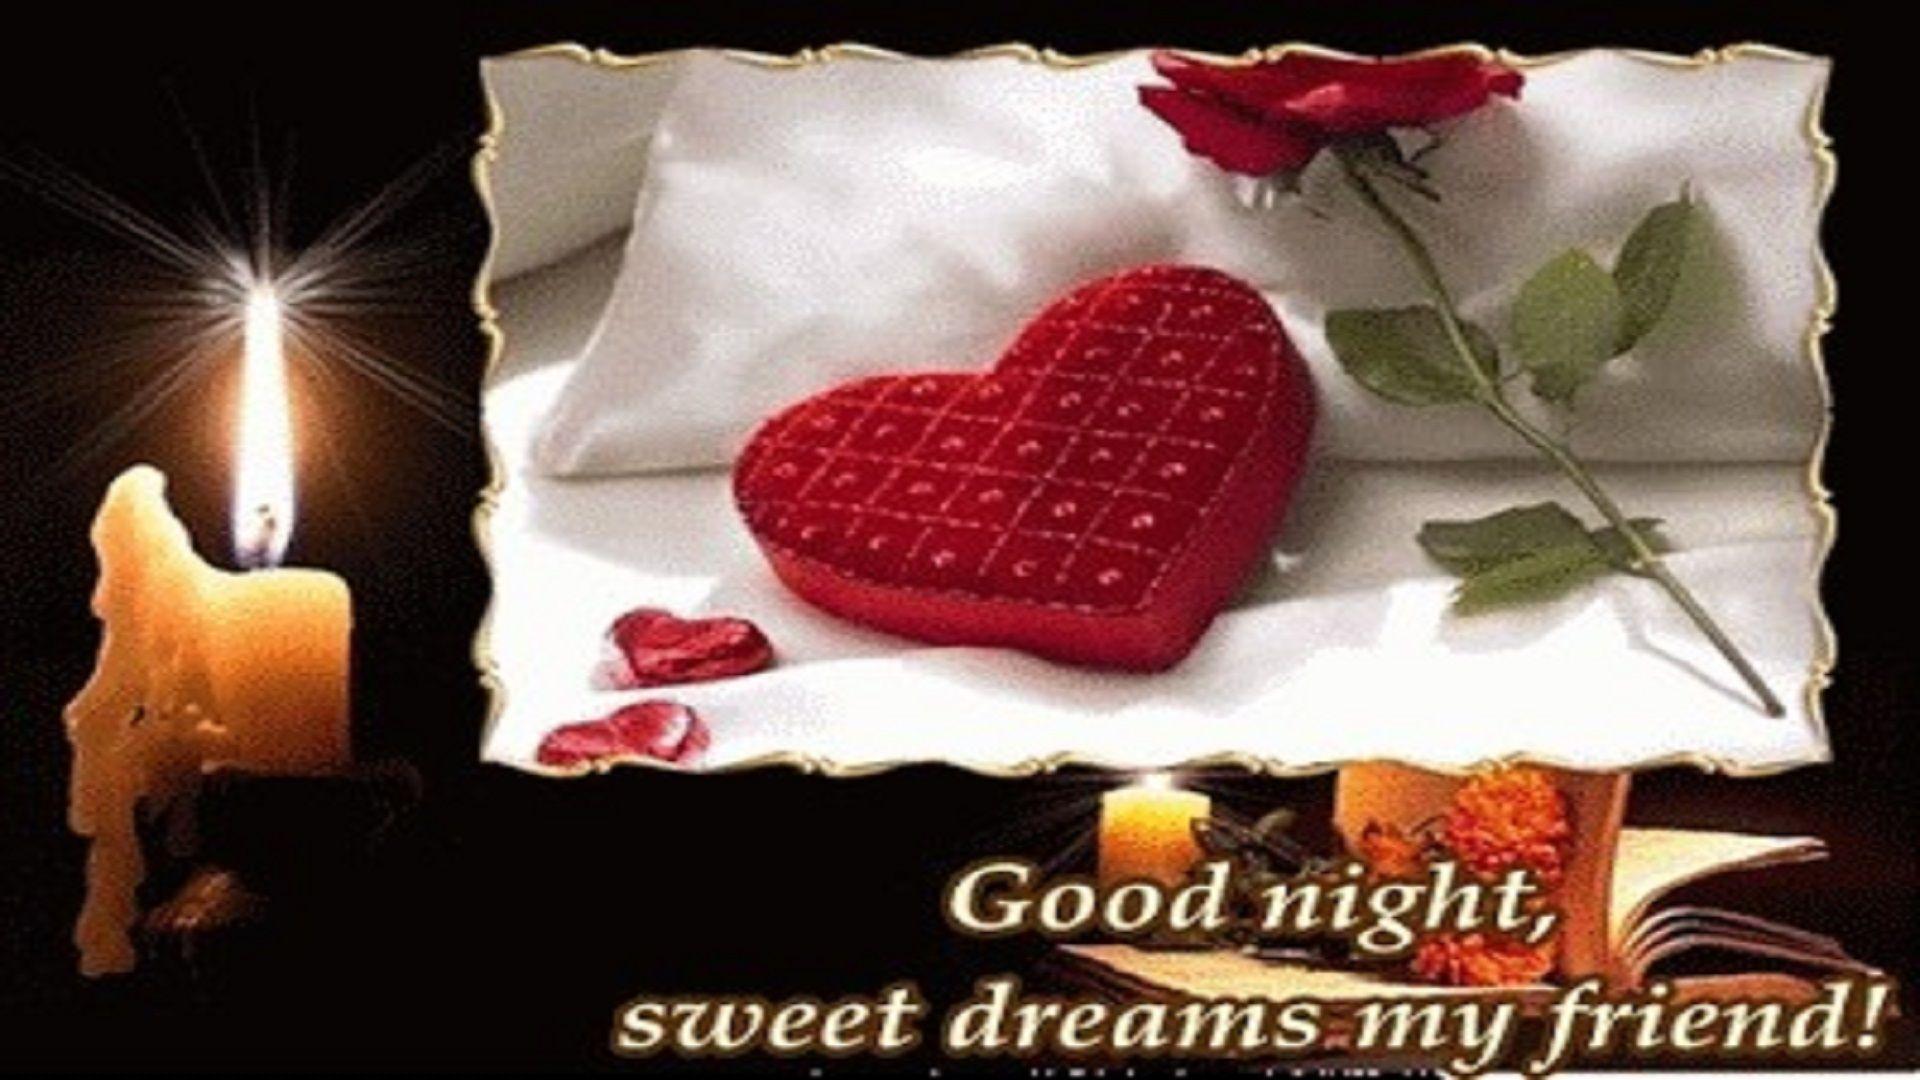 Good Night Sweet Dreams HD Wallpaper Image The Best Collection